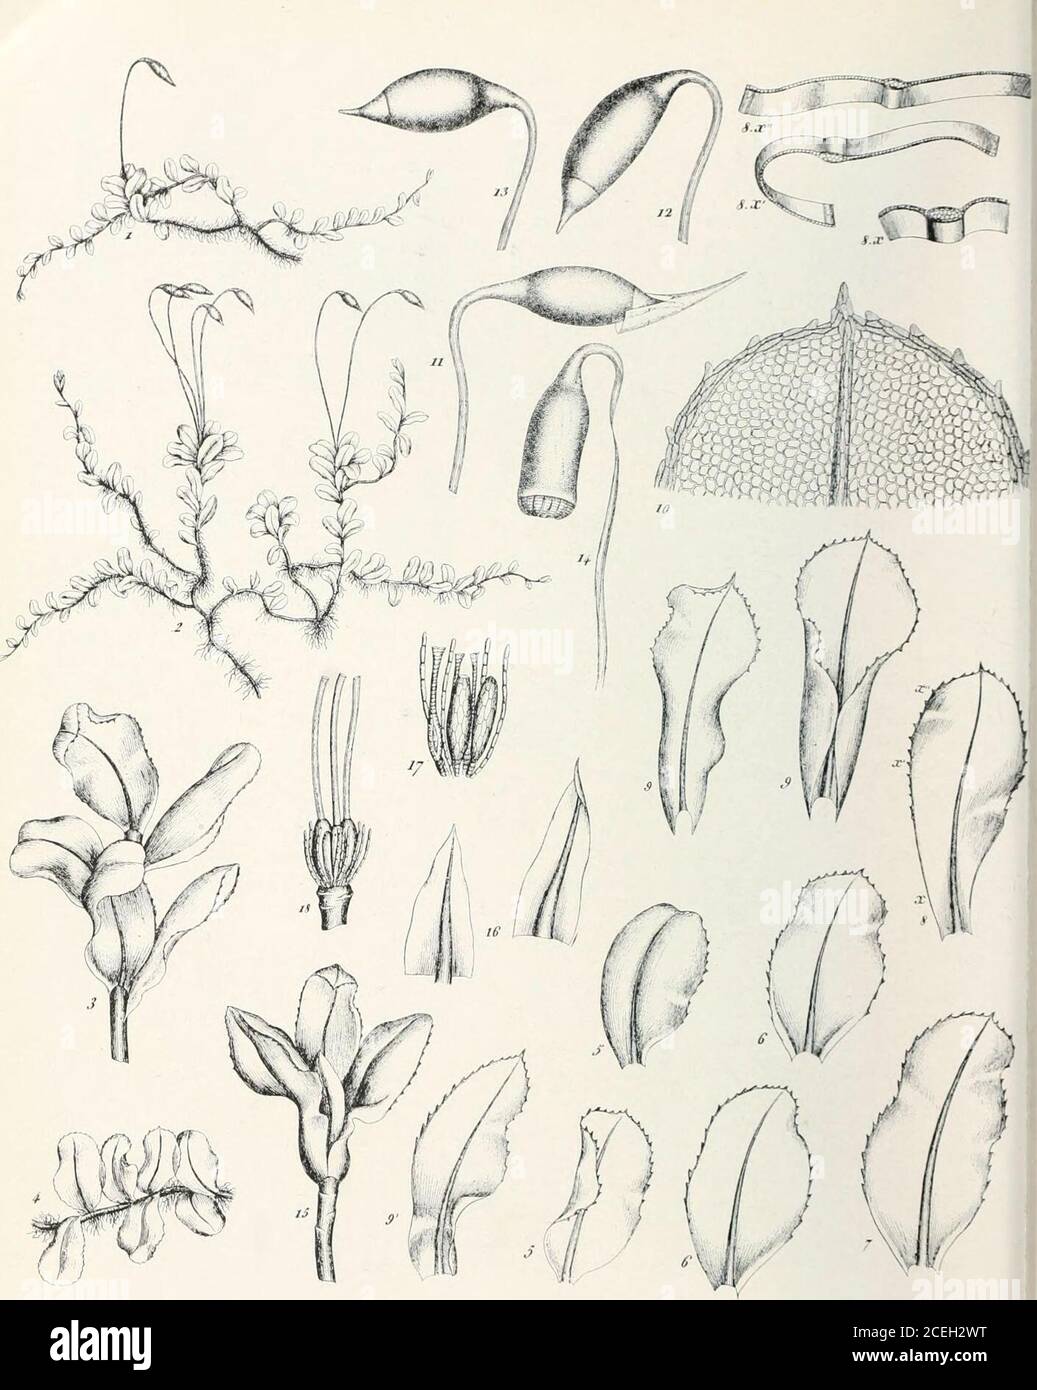 . Mosses with hand-lens and microscope : a non-technical hand-book of the more common mosses of the northeastern United States. PLATE LL. M,„i,m afine (From Bry. Eur.). PLATE L. Mriiiim roslrtitiim (From Bry. Eur.) BRYACEAE 231 The leaf cells are nearly twice as large as in the last, 25-40^, somewhatlonger than broad, sometimes reaching 70^ in length according to Limpricht.Dioicoits ; capsules usually single, maturing in May. M. affine Bland. The common form of this species is the variety describedabove. The species is rather rare and is a more puzzling form for the student.It has the capsul Stock Photo